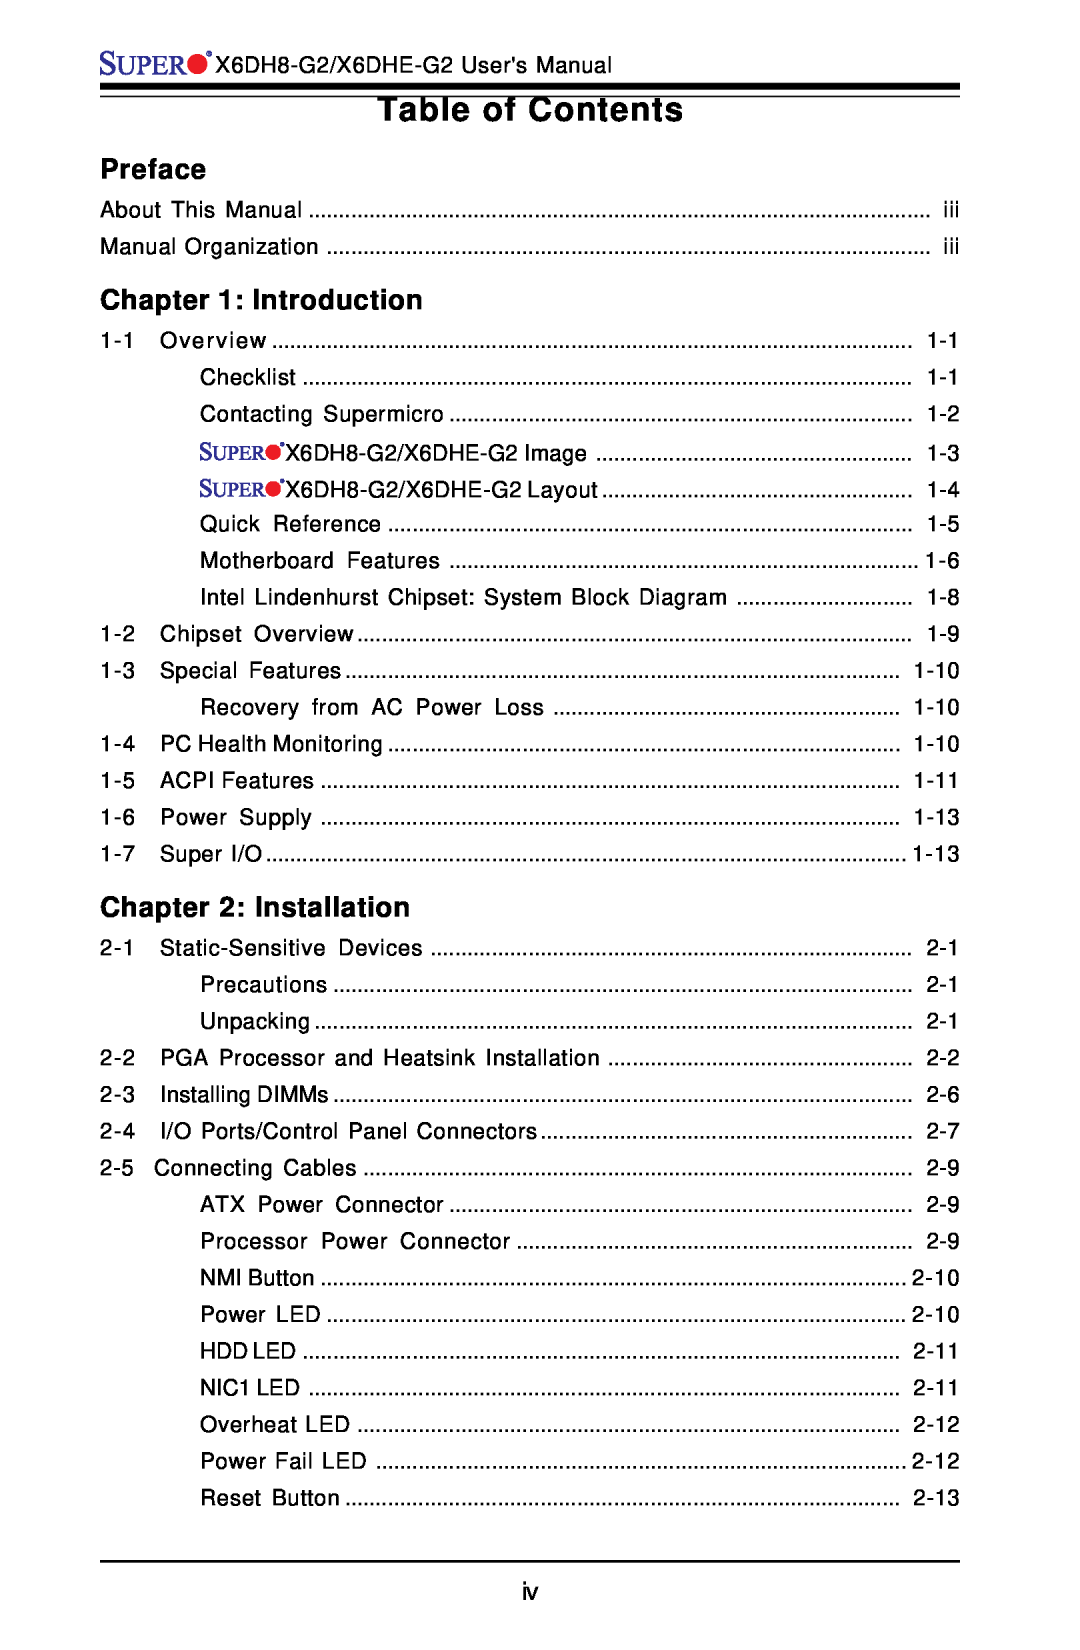 SUPER MICRO Computer X6DH8-G2, X6DHE-G2 manual Table of Contents, Preface, Introduction, Installation 